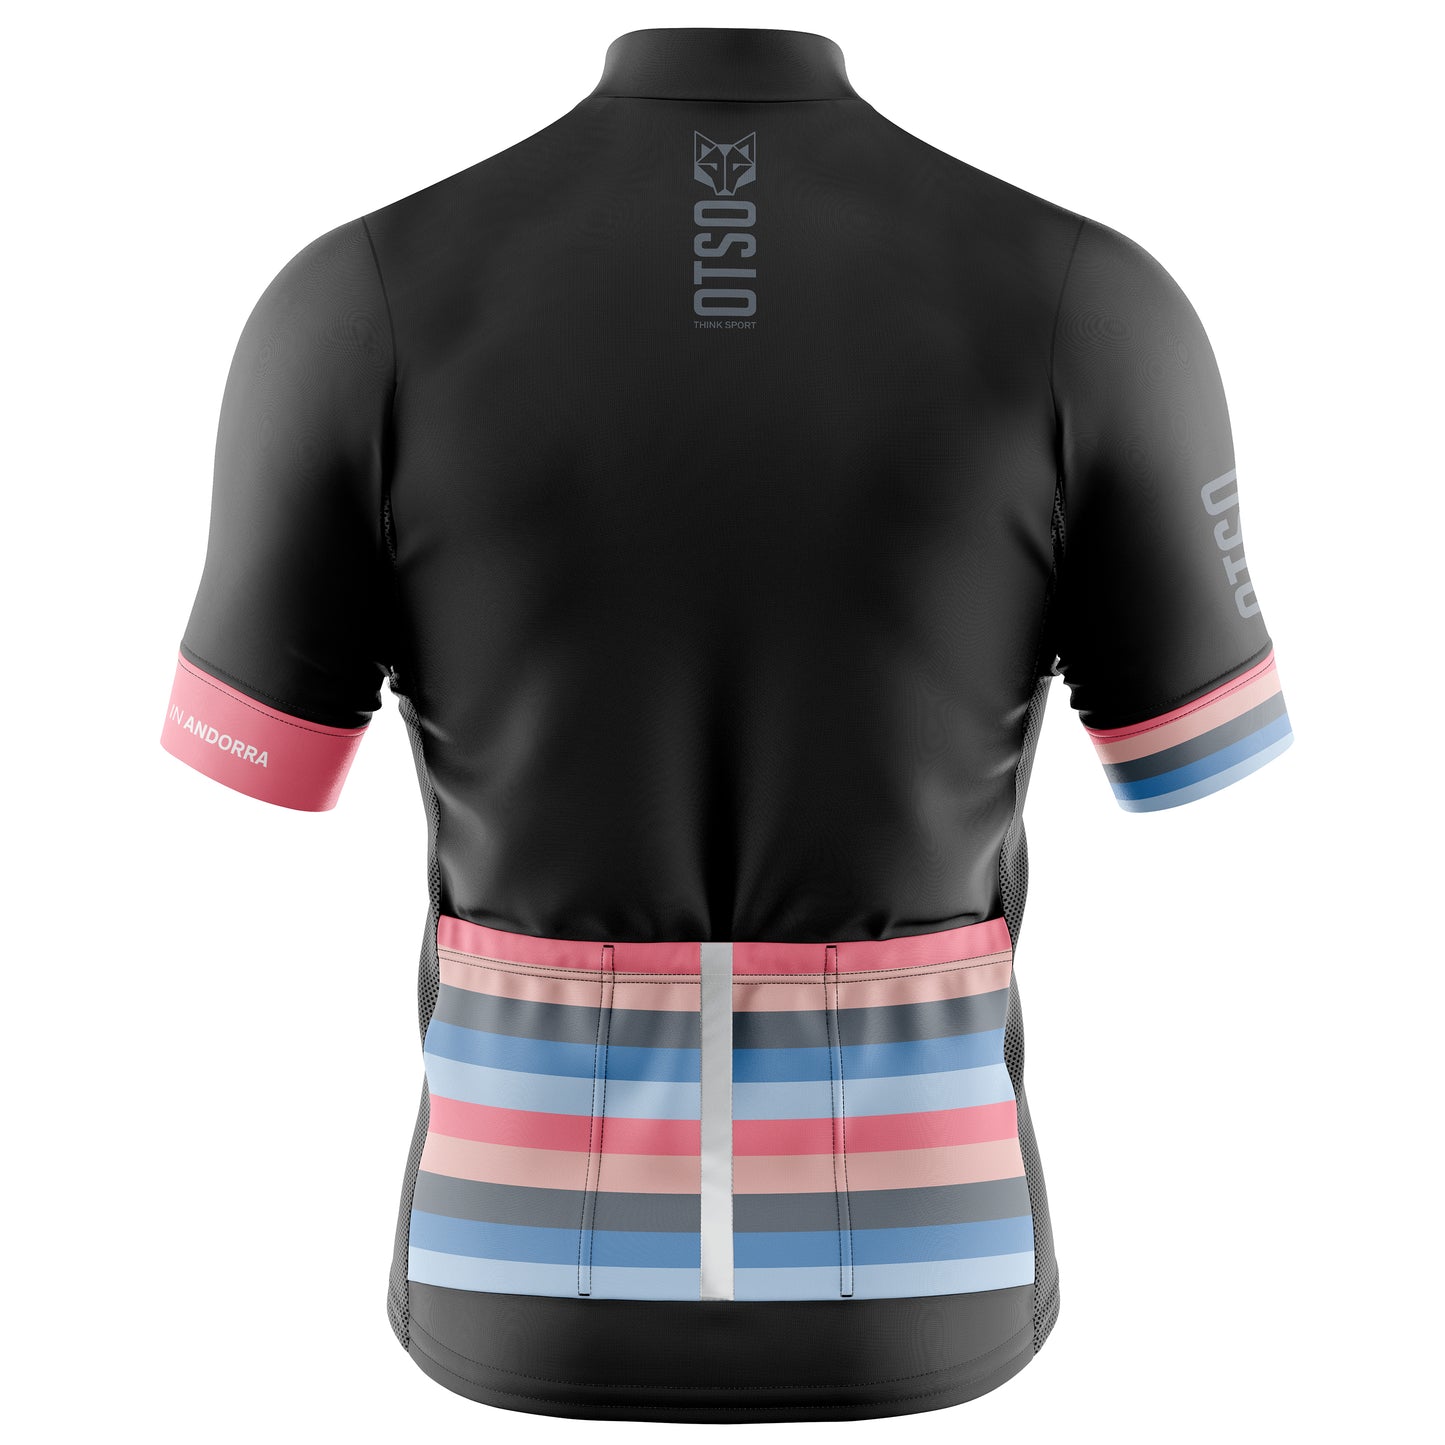 Maillot de ciclismo manga corta mujer - Stripes Black (Outlet)